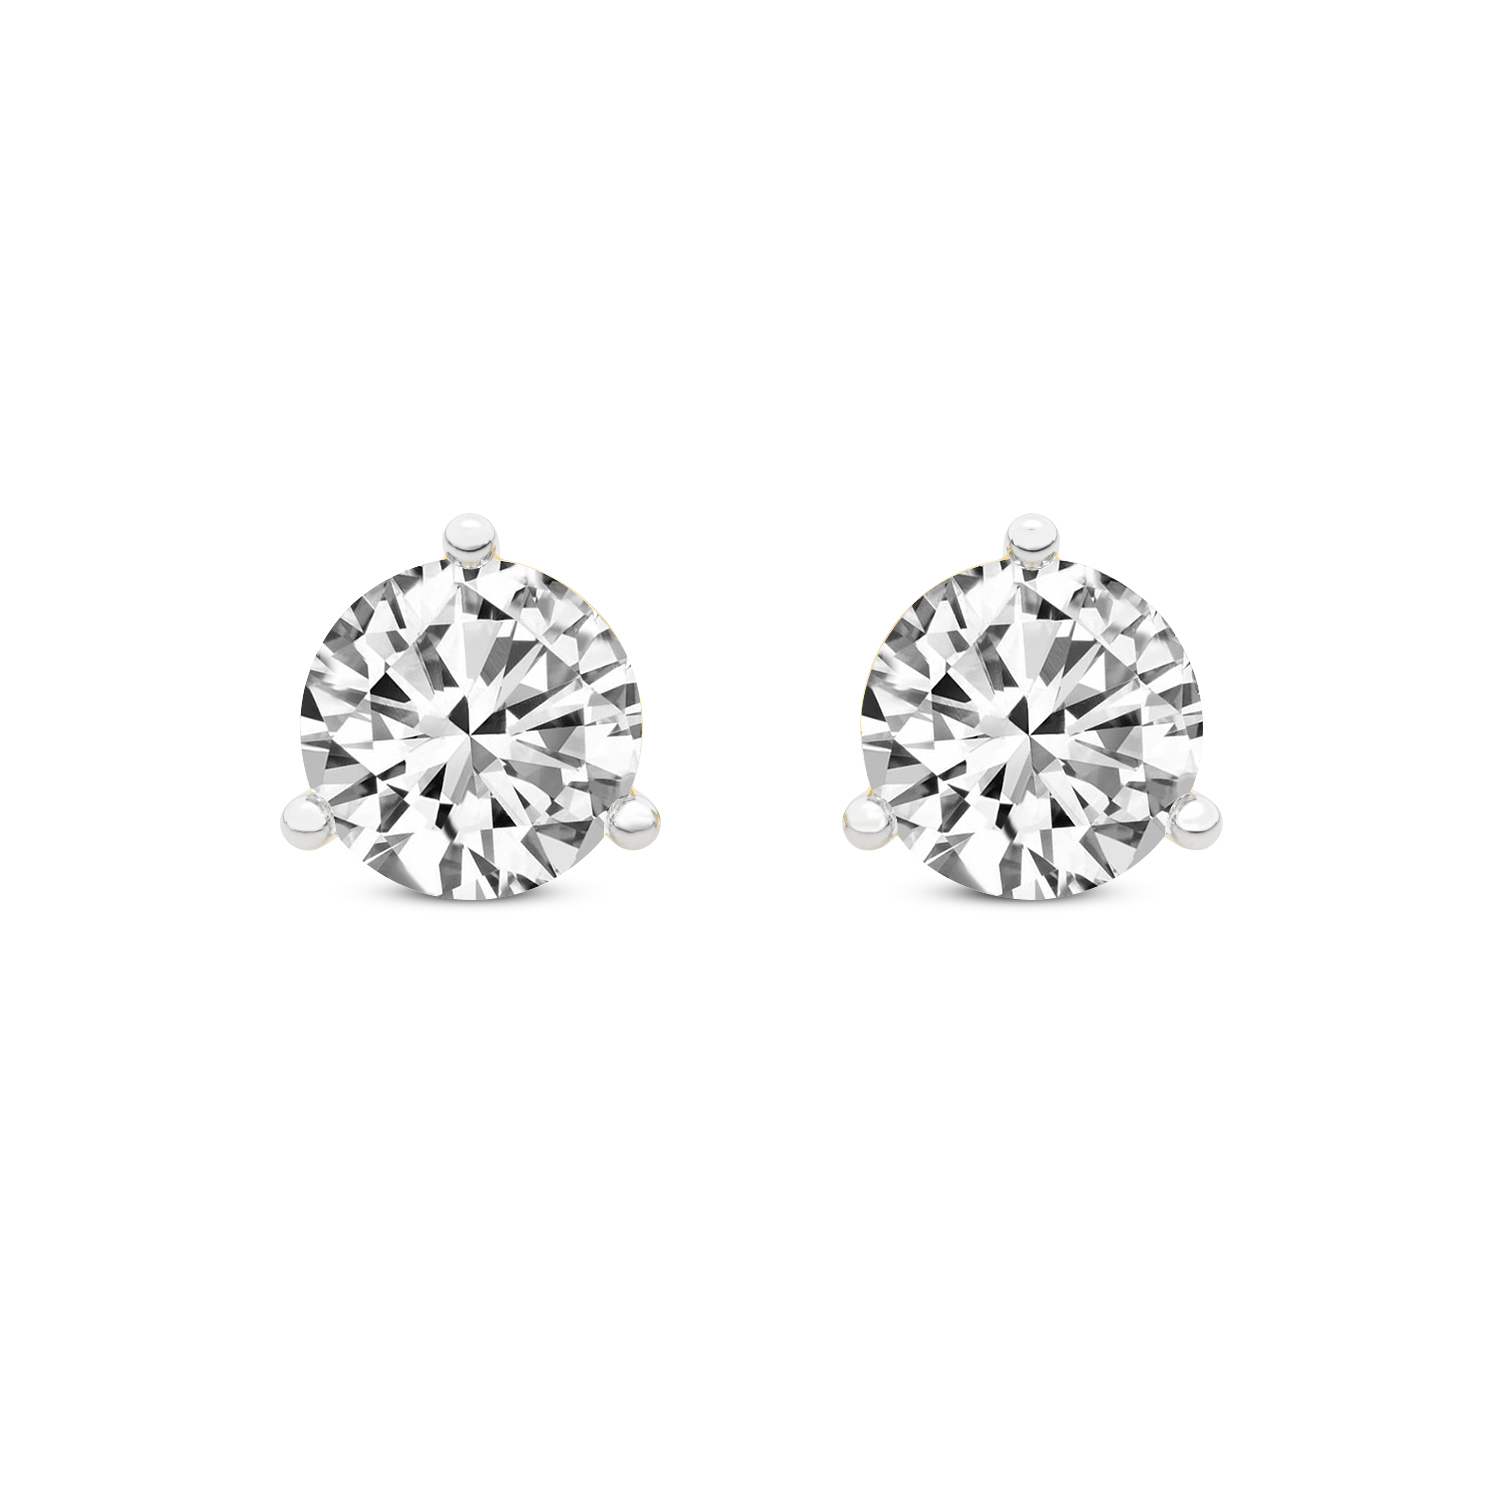 3 Prong Martini Round Lab Diamond Stud Earrings yellow gold earring, small front view